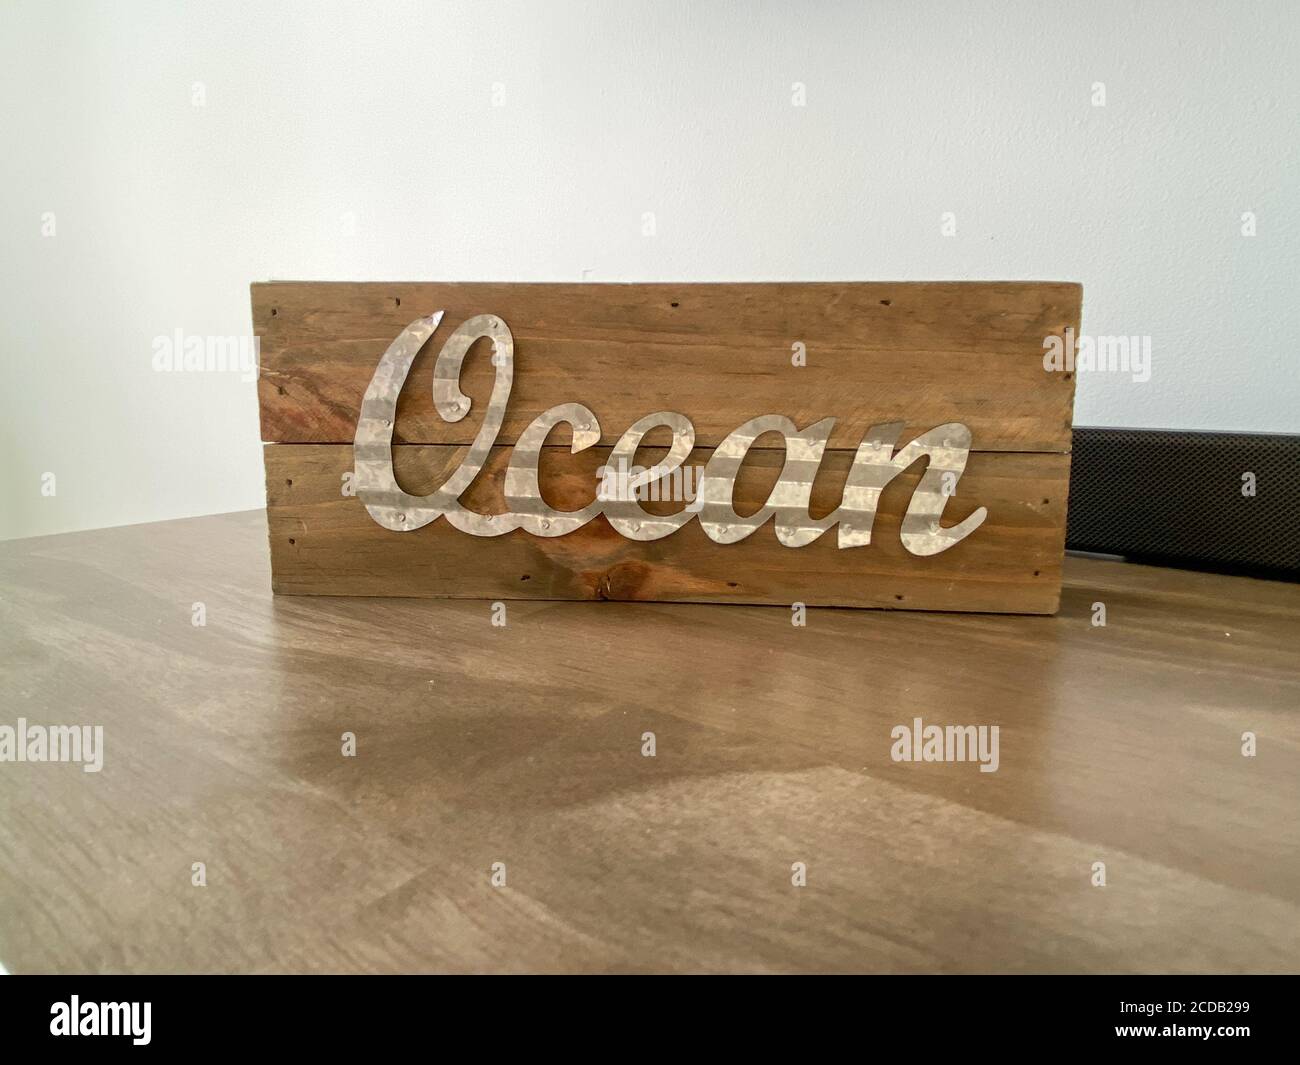 A wooden beach decoration on a table with the word ocean in cursive writing. Stock Photo